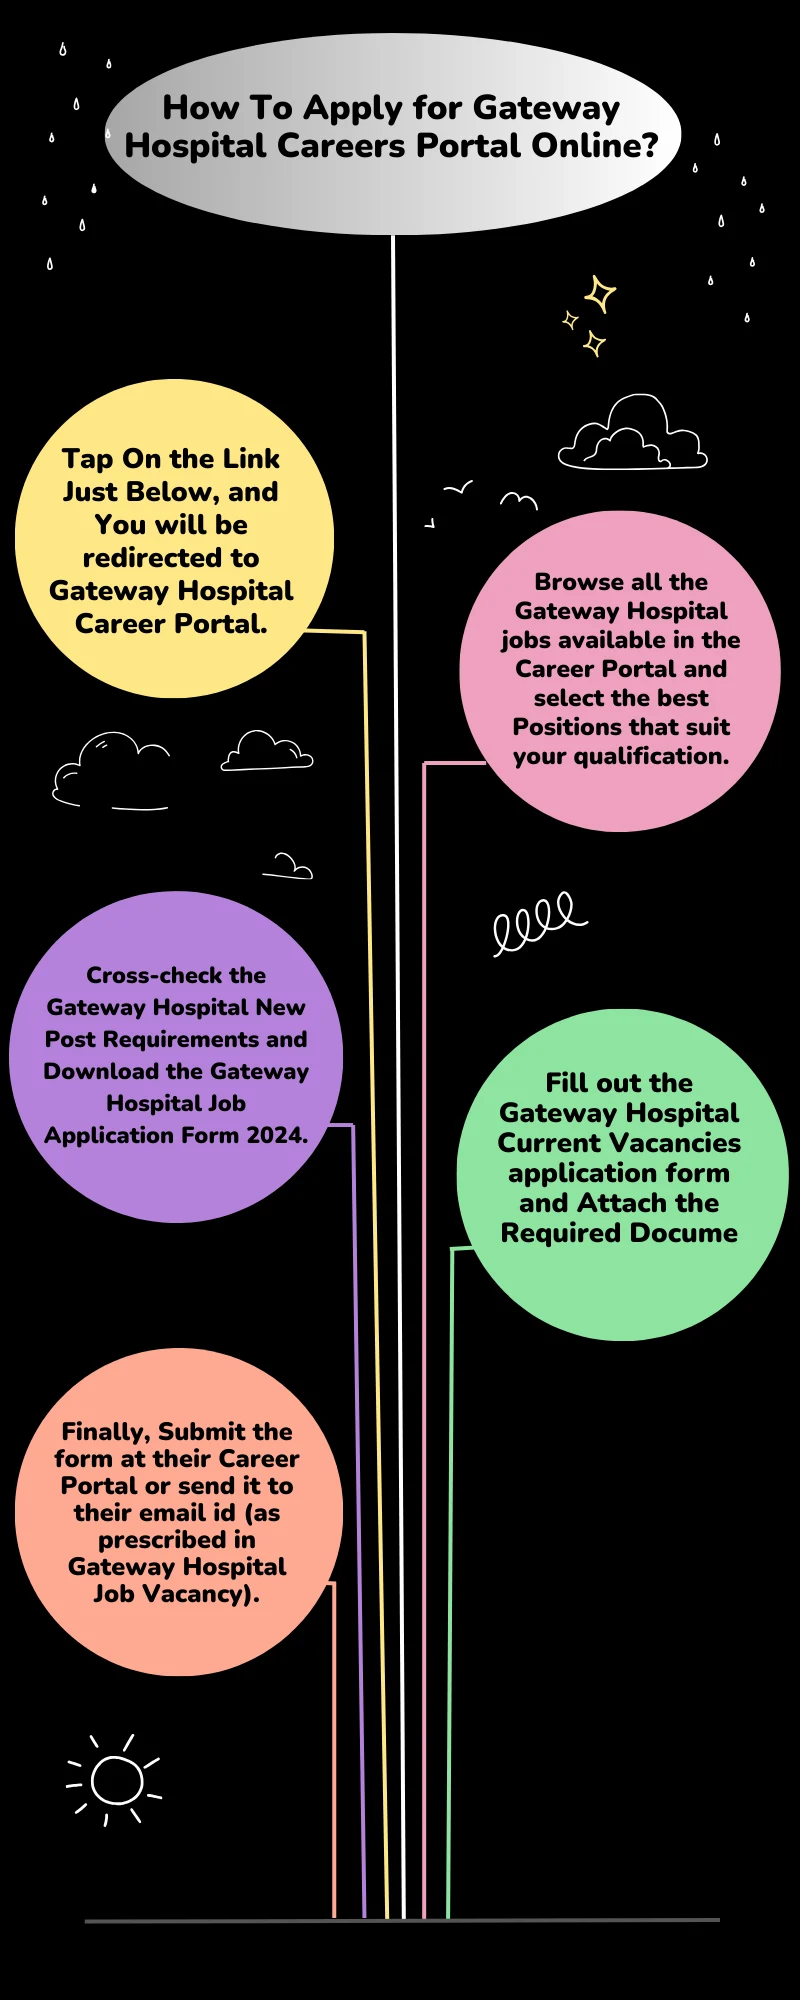 How To Apply for Gateway Hospital Careers Portal Online?